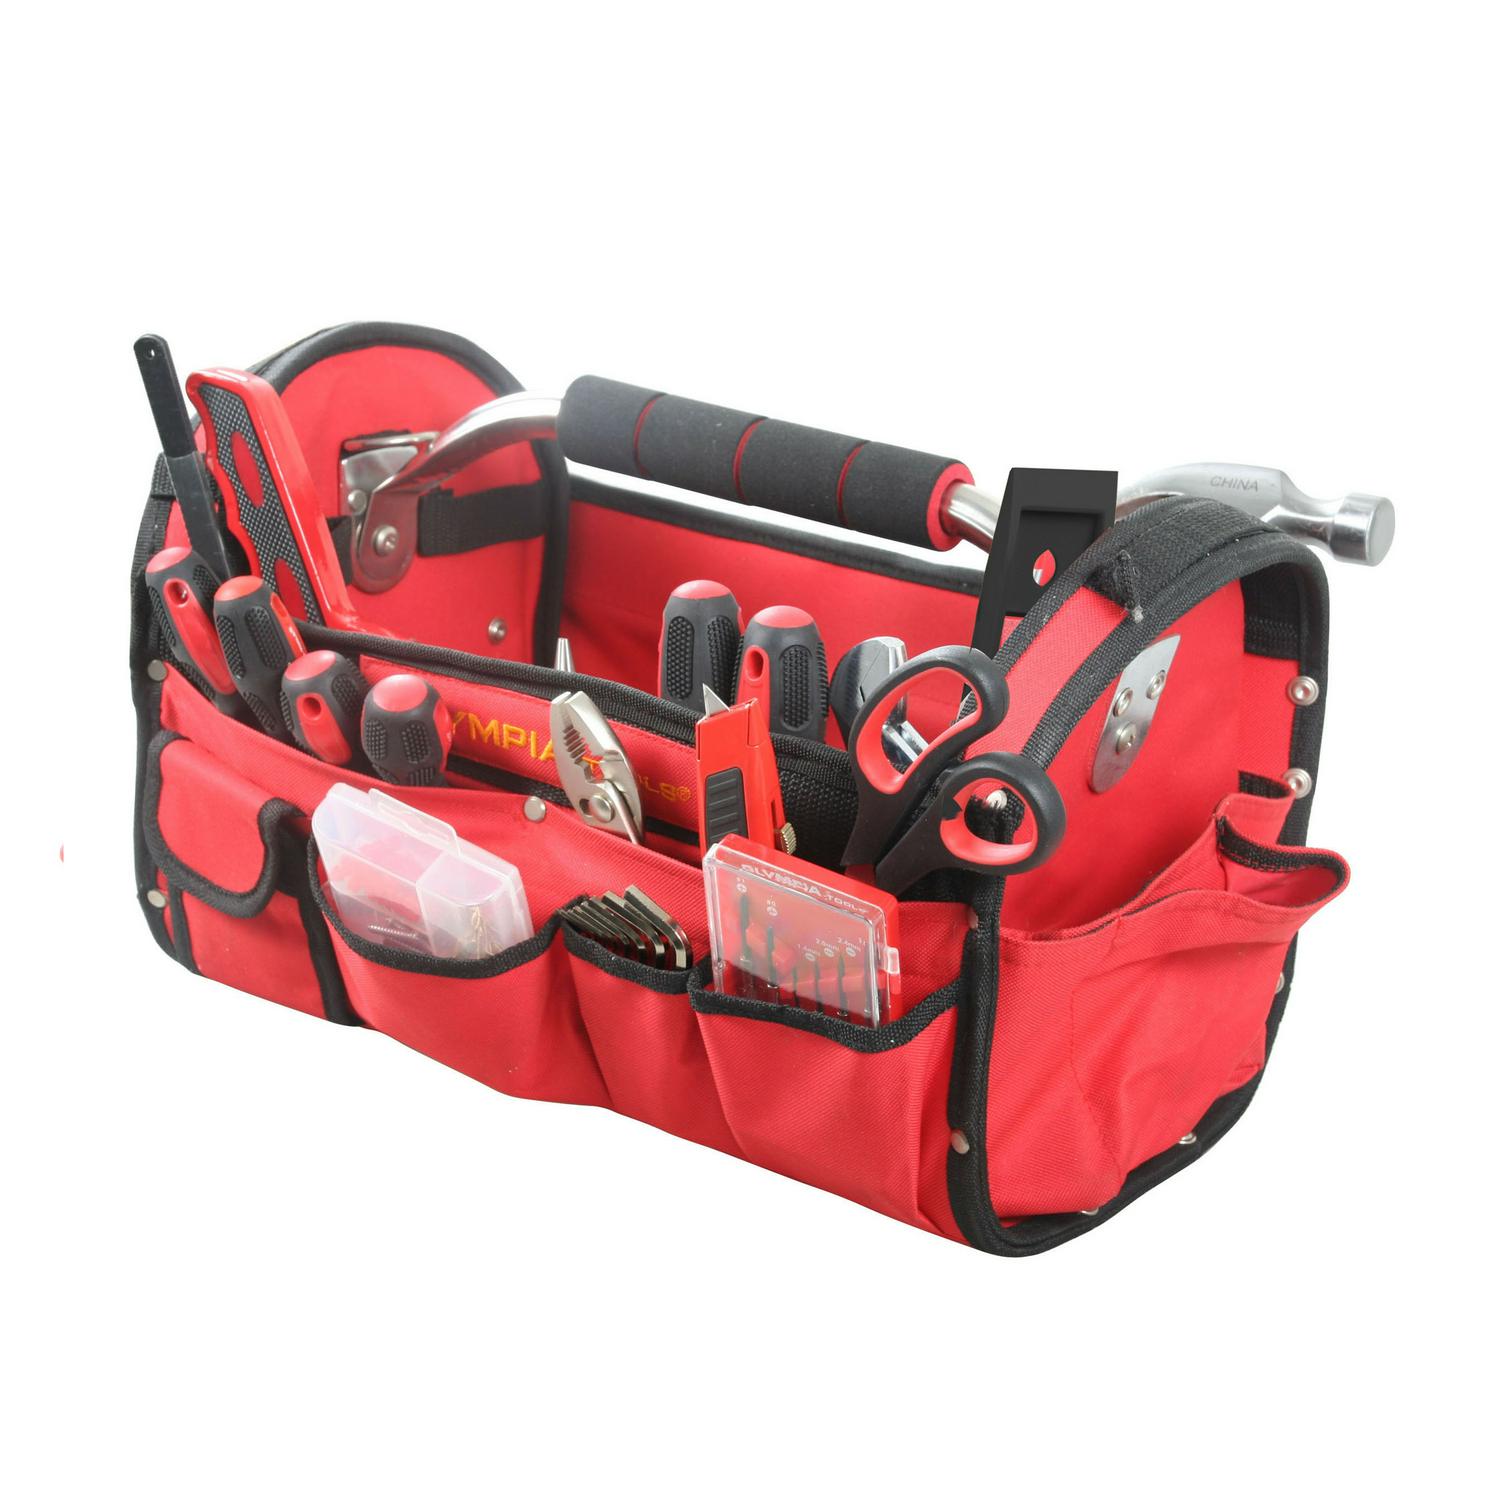 Olympia Tools 90-447 Red and Black Tool Bag 52 Piece Set